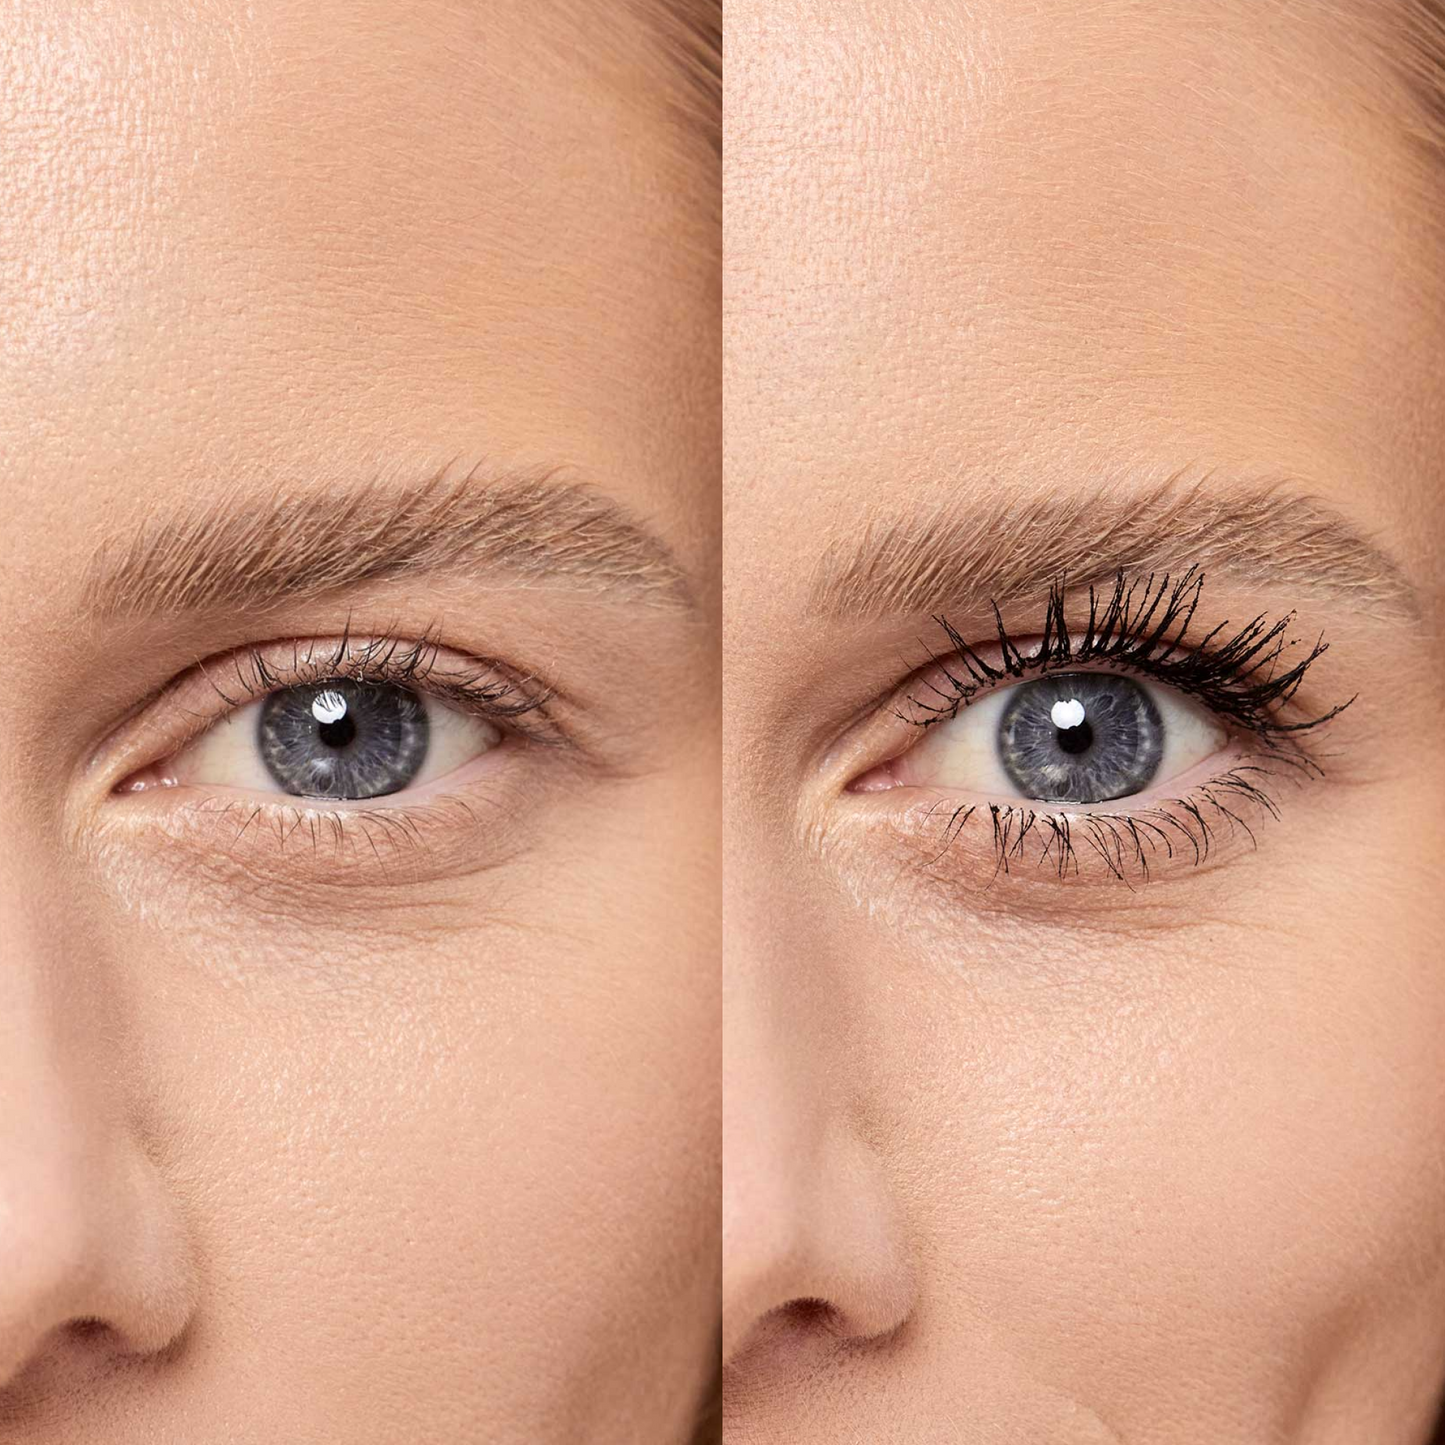 [Shared: A close up of a model's eyelashes before and after applying the Tower 28 Beauty's MakeWaves Mascara in Jet. Lashes are visibly lifted and lengthened]